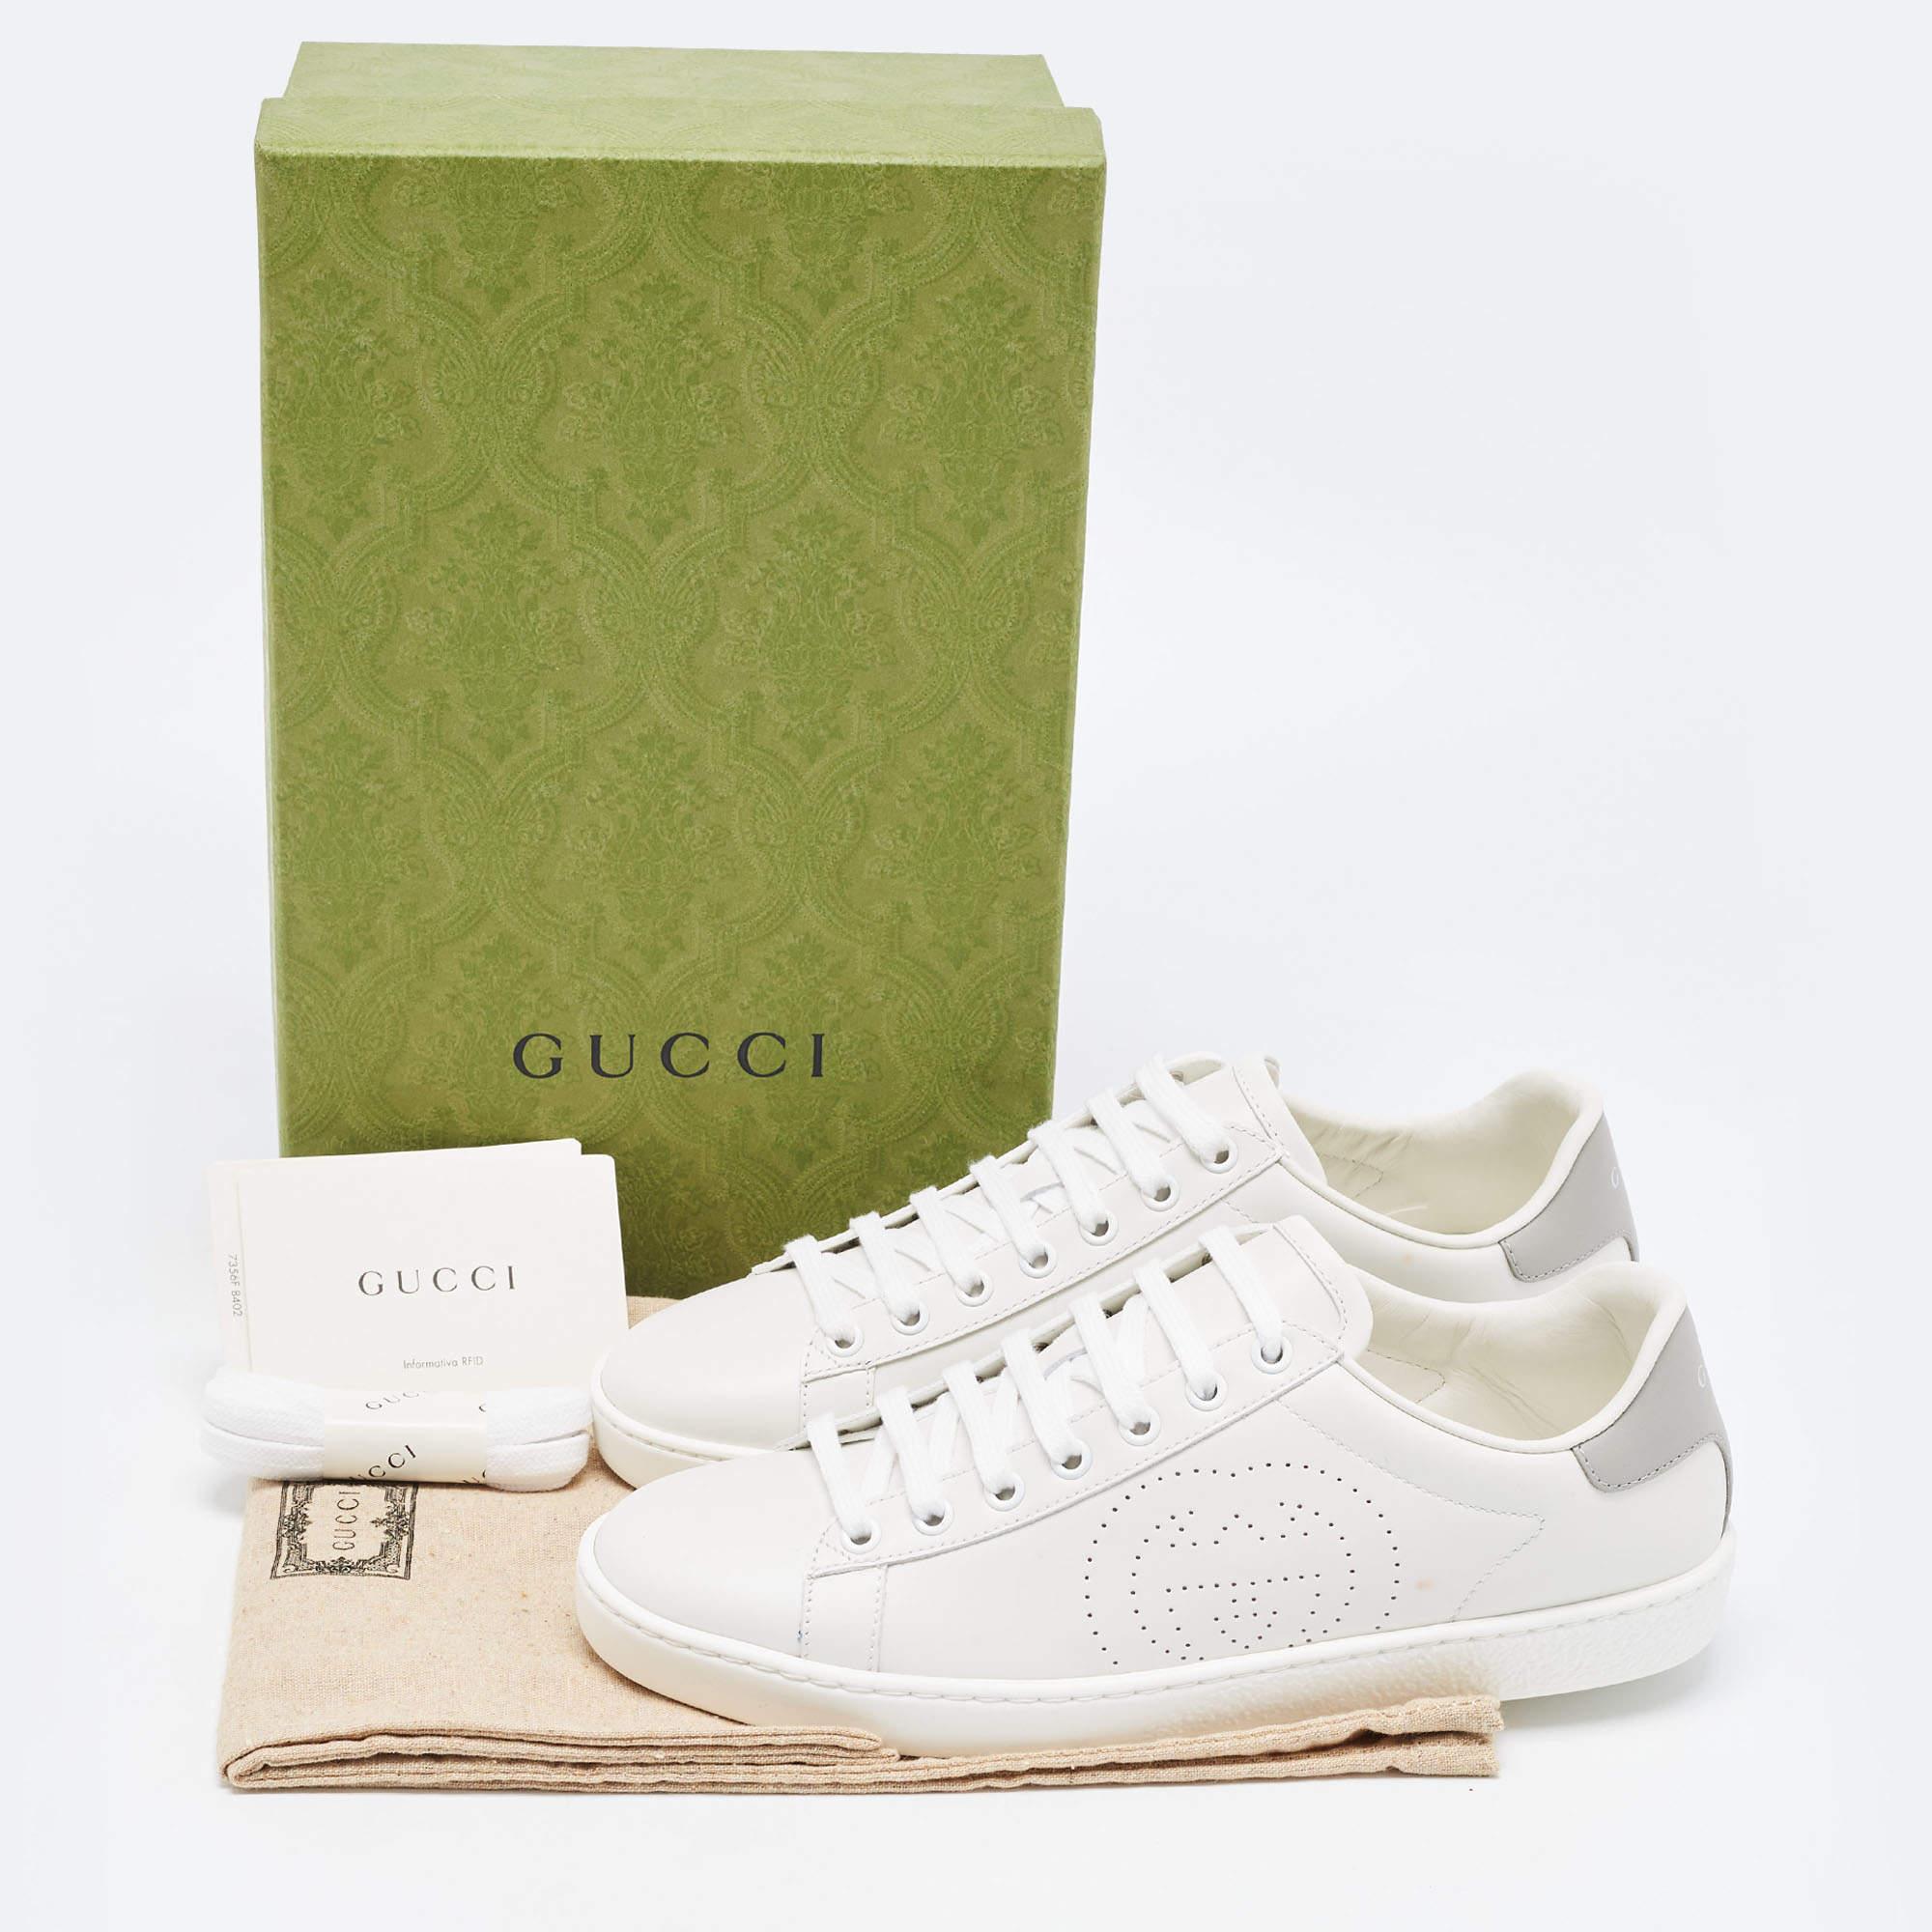 Gucci White Perforated Interlocking G Leather Ace Low Top Sneakers Size 38 5